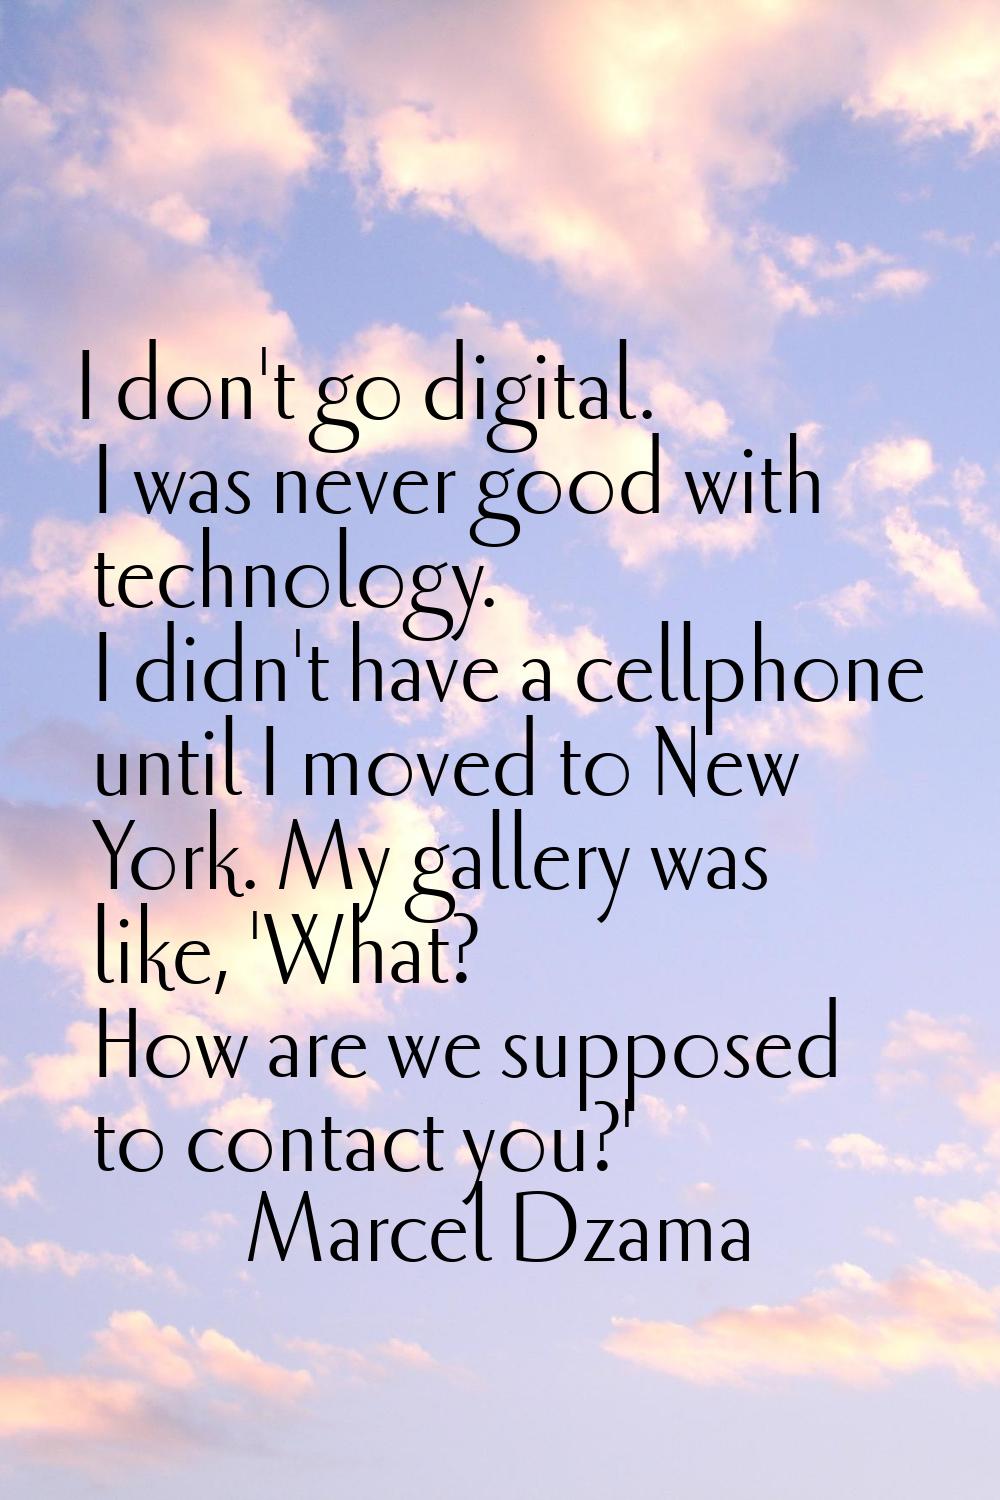 I don't go digital. I was never good with technology. I didn't have a cellphone until I moved to Ne